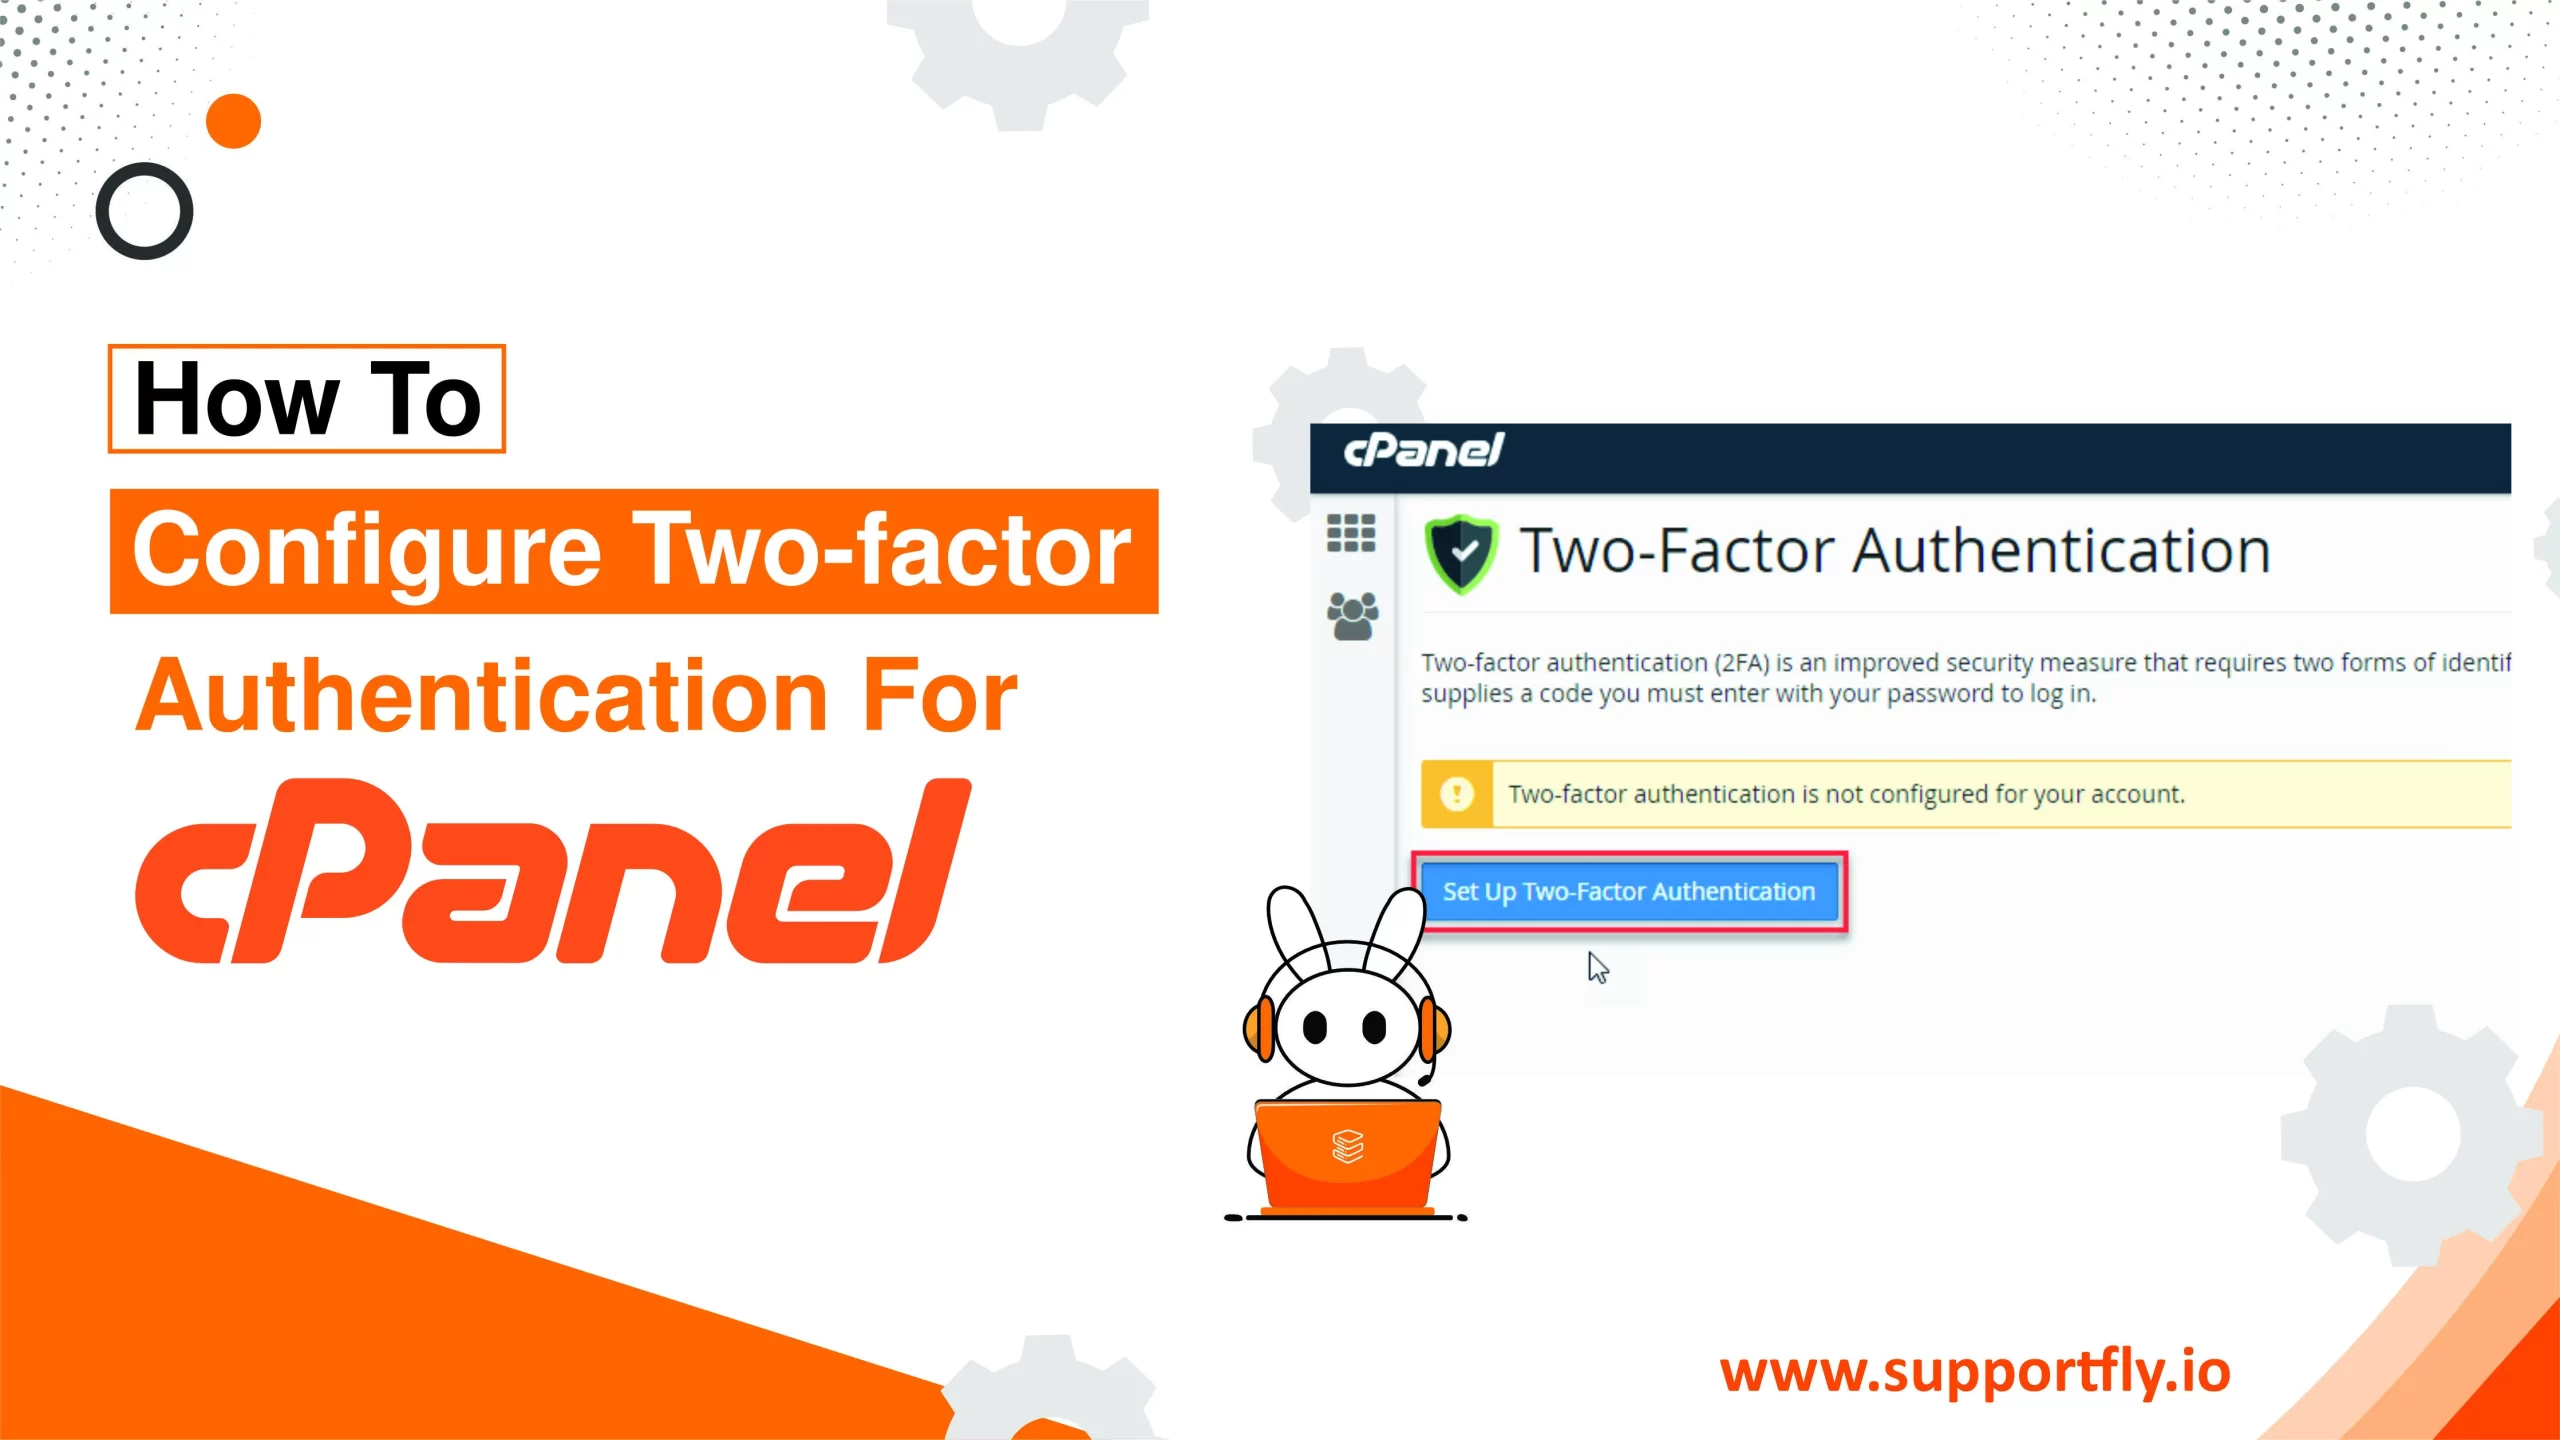 You are currently viewing How to Configure two-factor authentication for cPanel